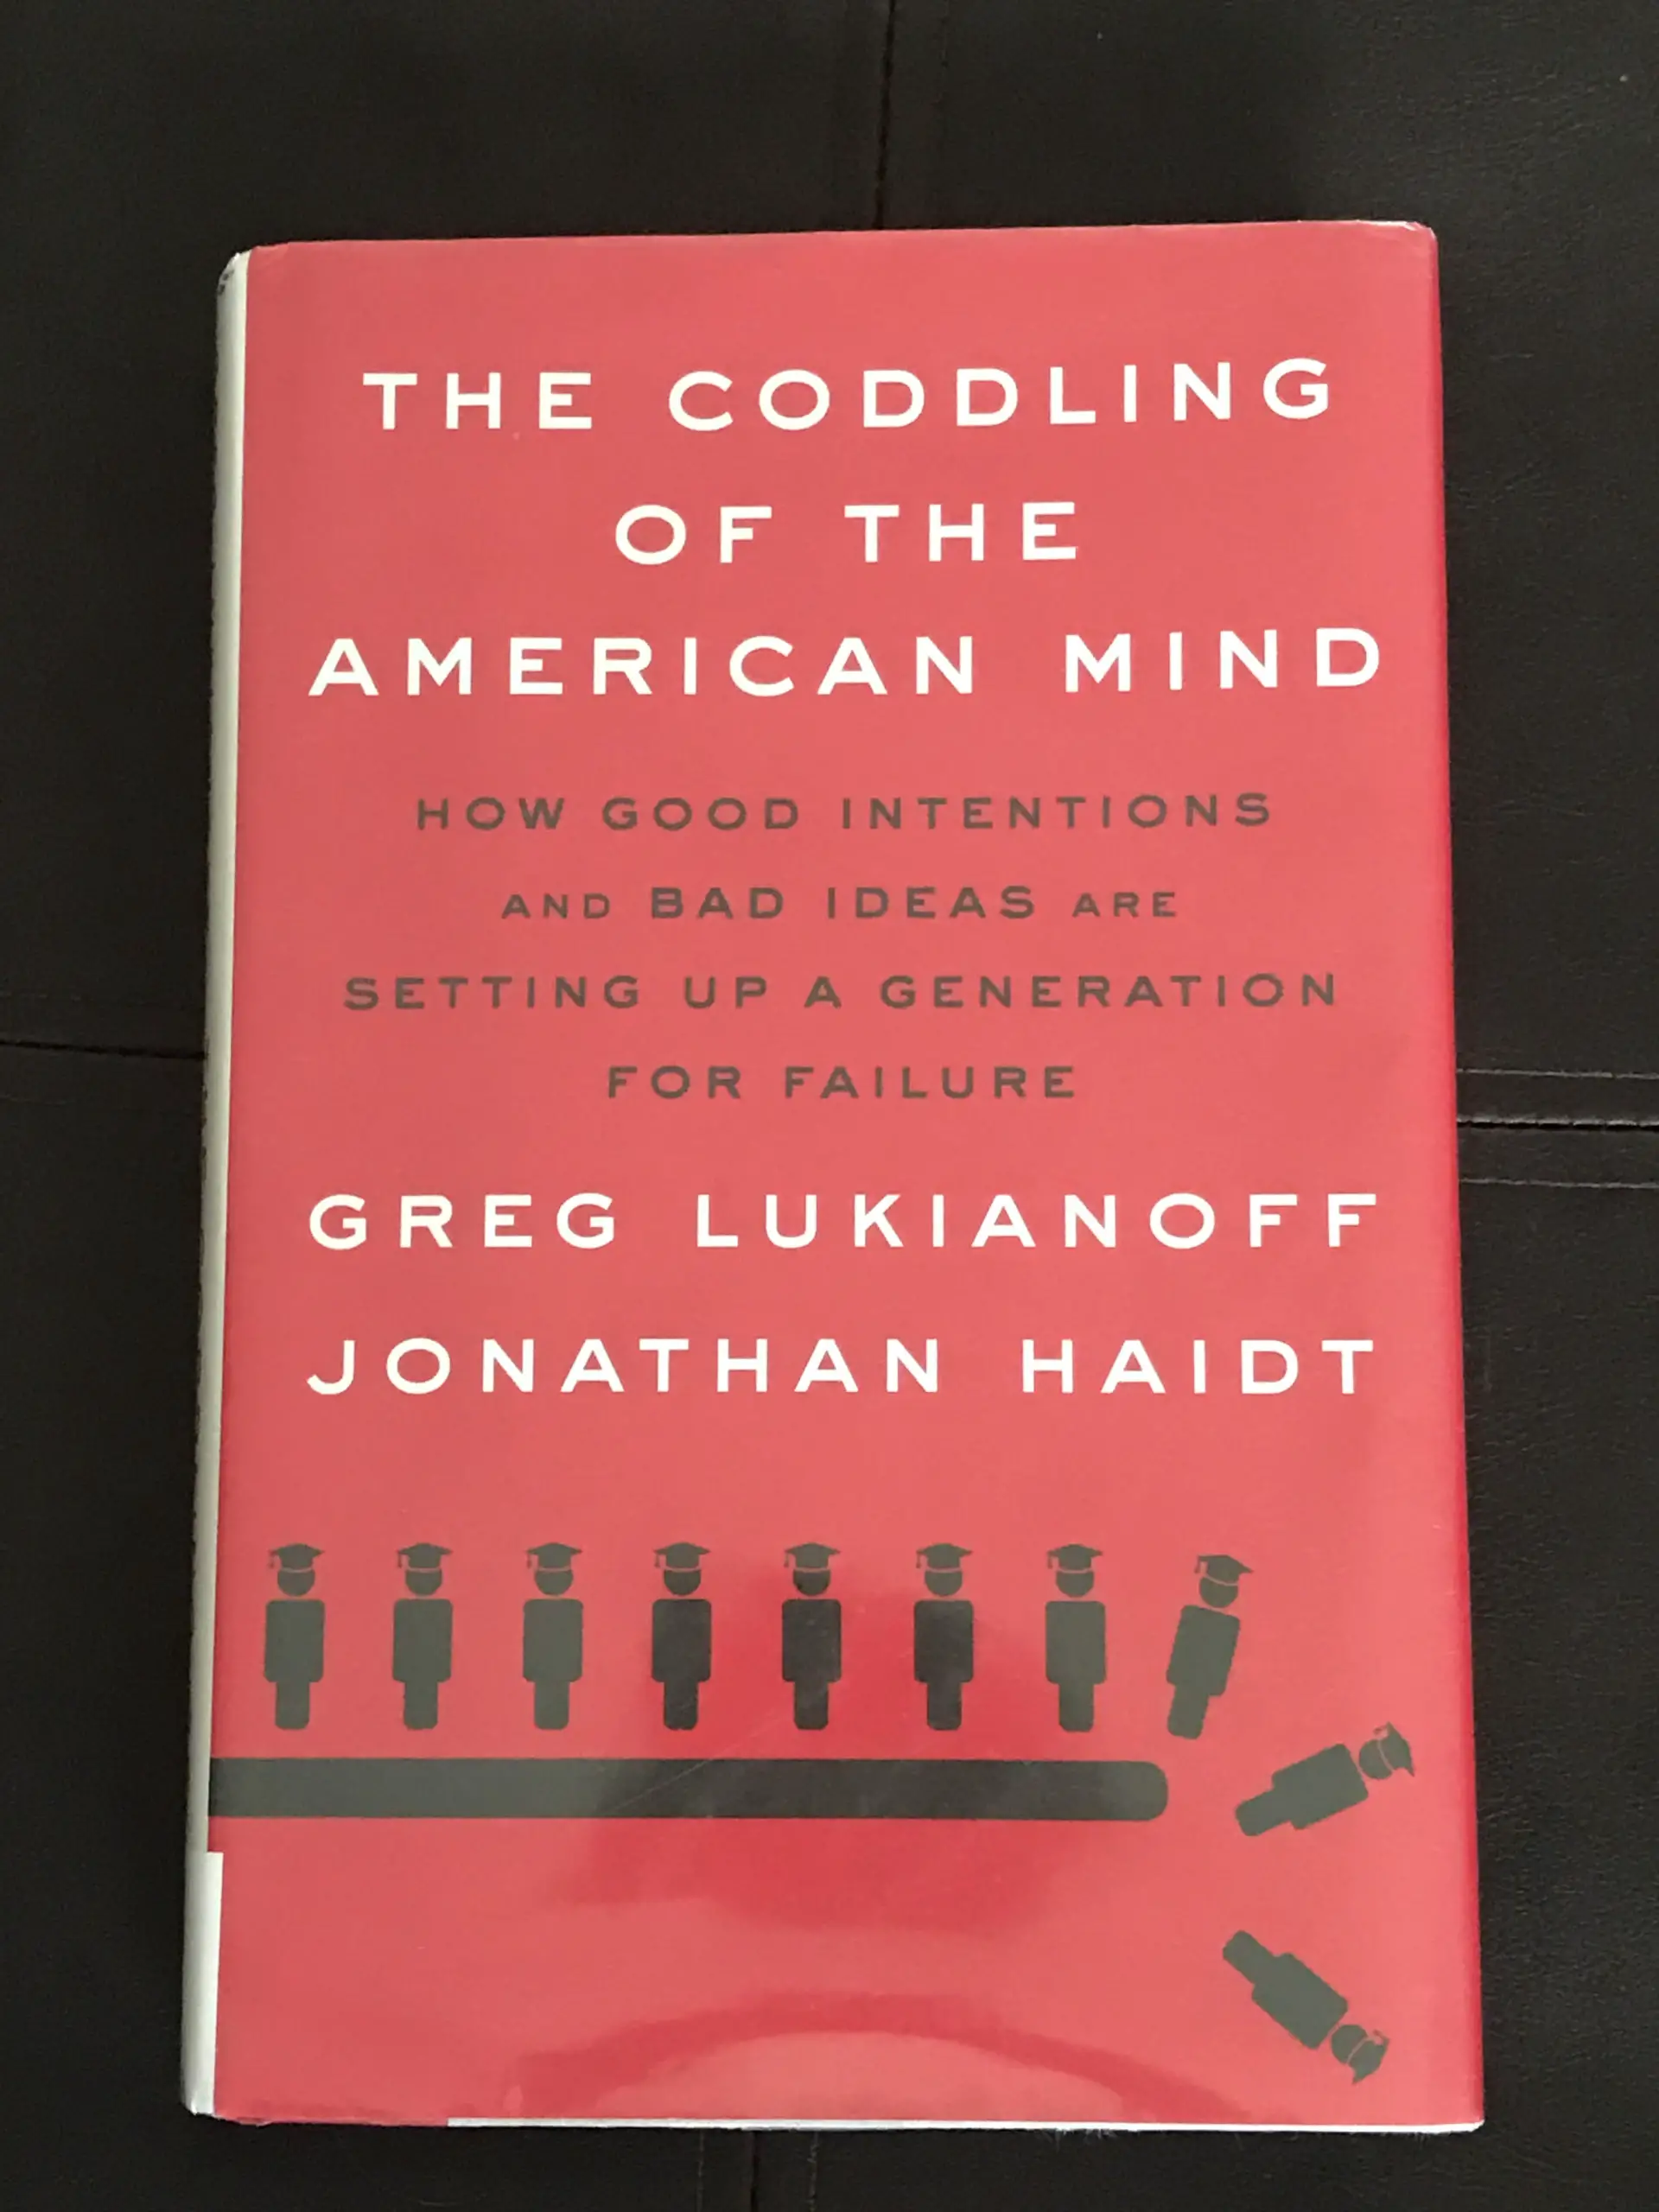 The Coddling of the American Mind book.